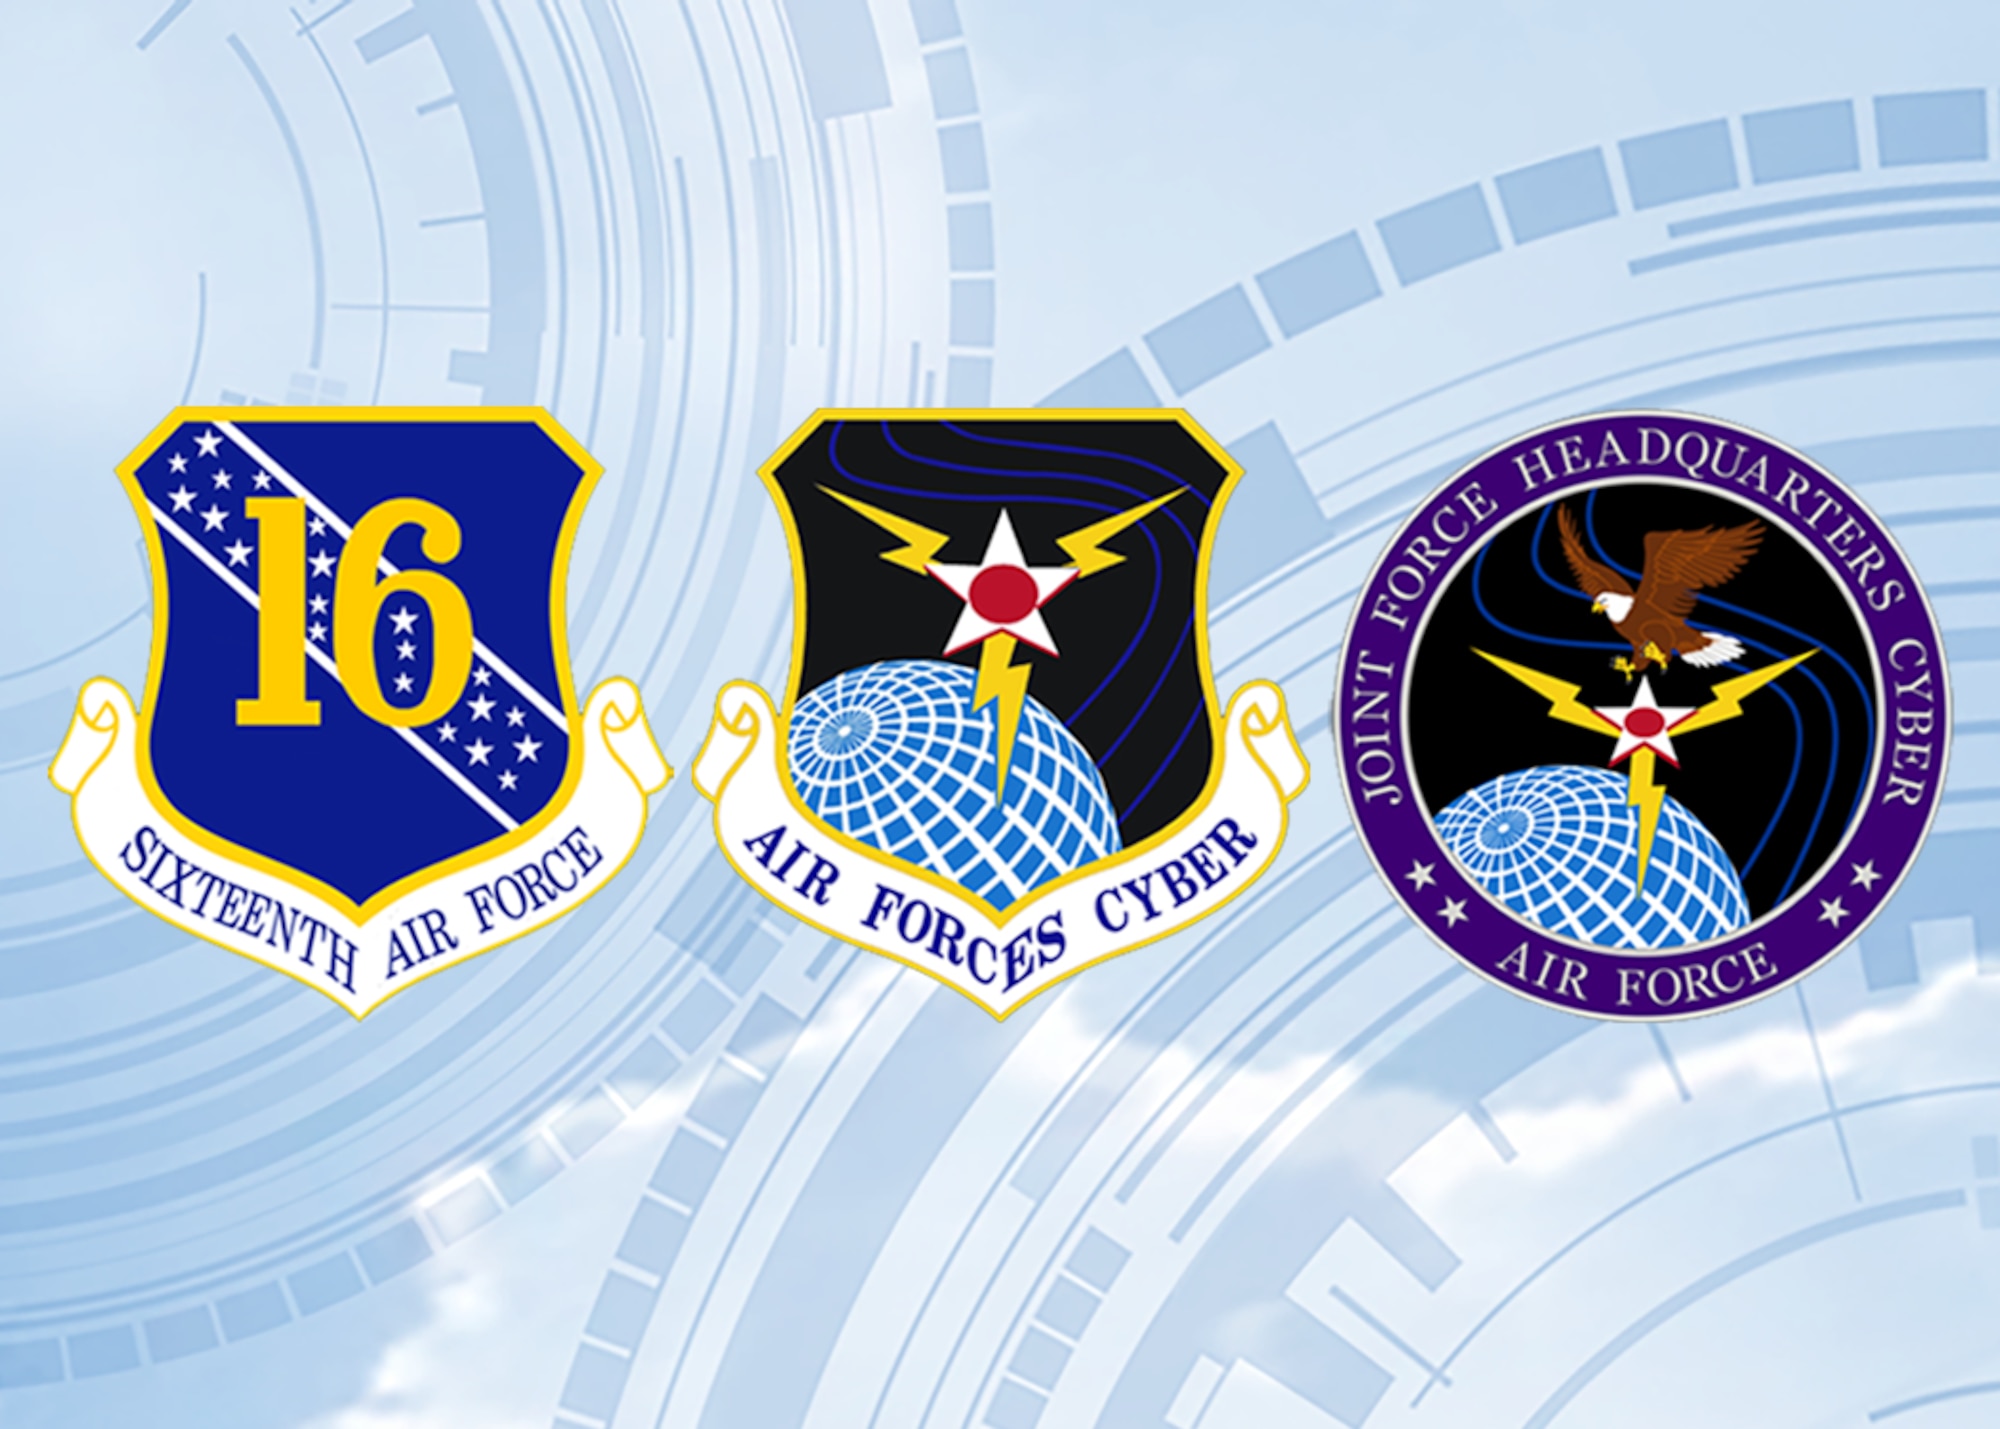 Sixteenth Air Force (Air Forces Cyber) Shields